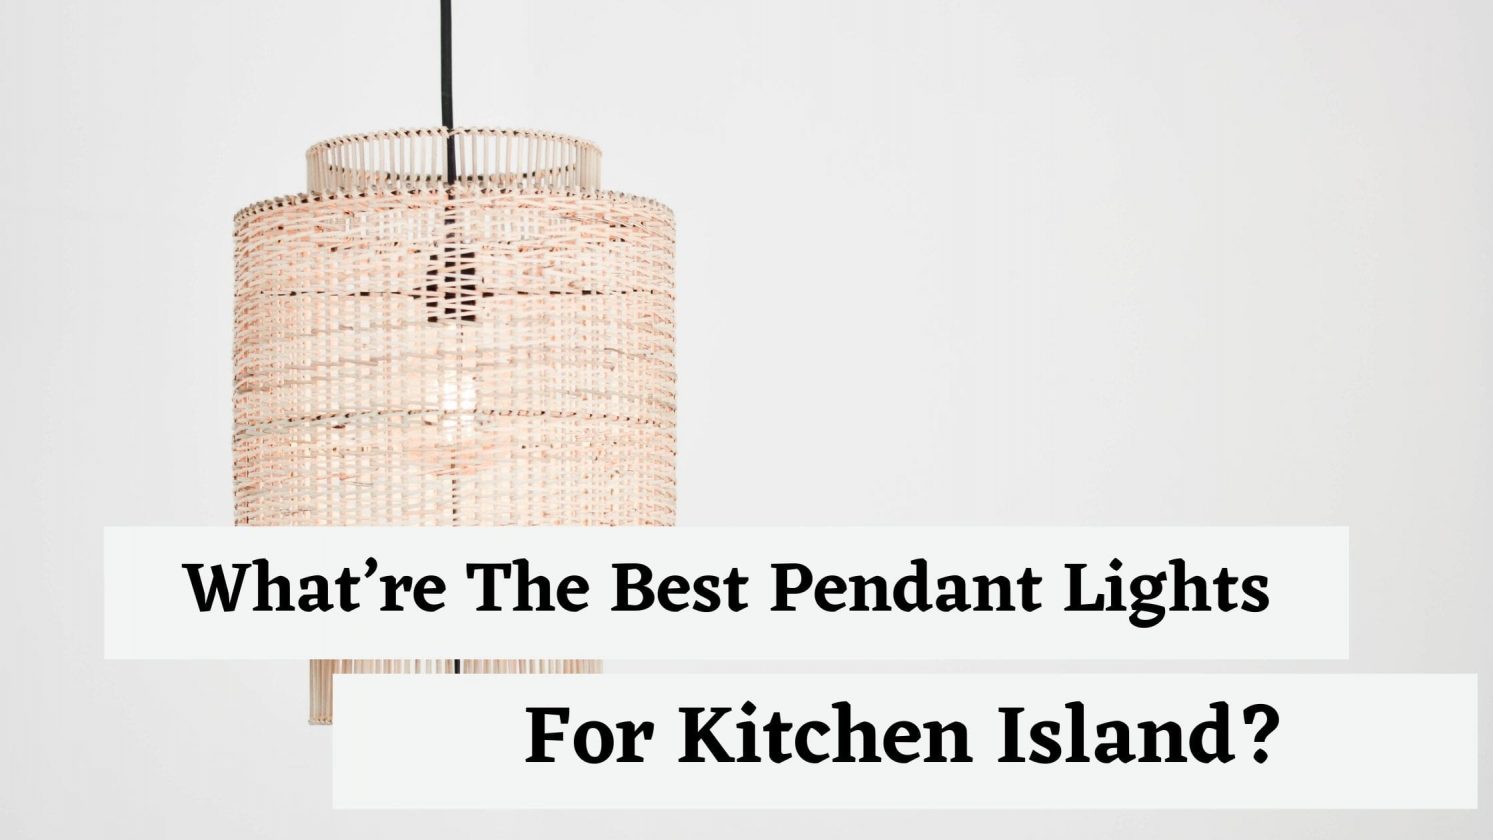 What’re The Best Pendant Lights For Kitchen Island?